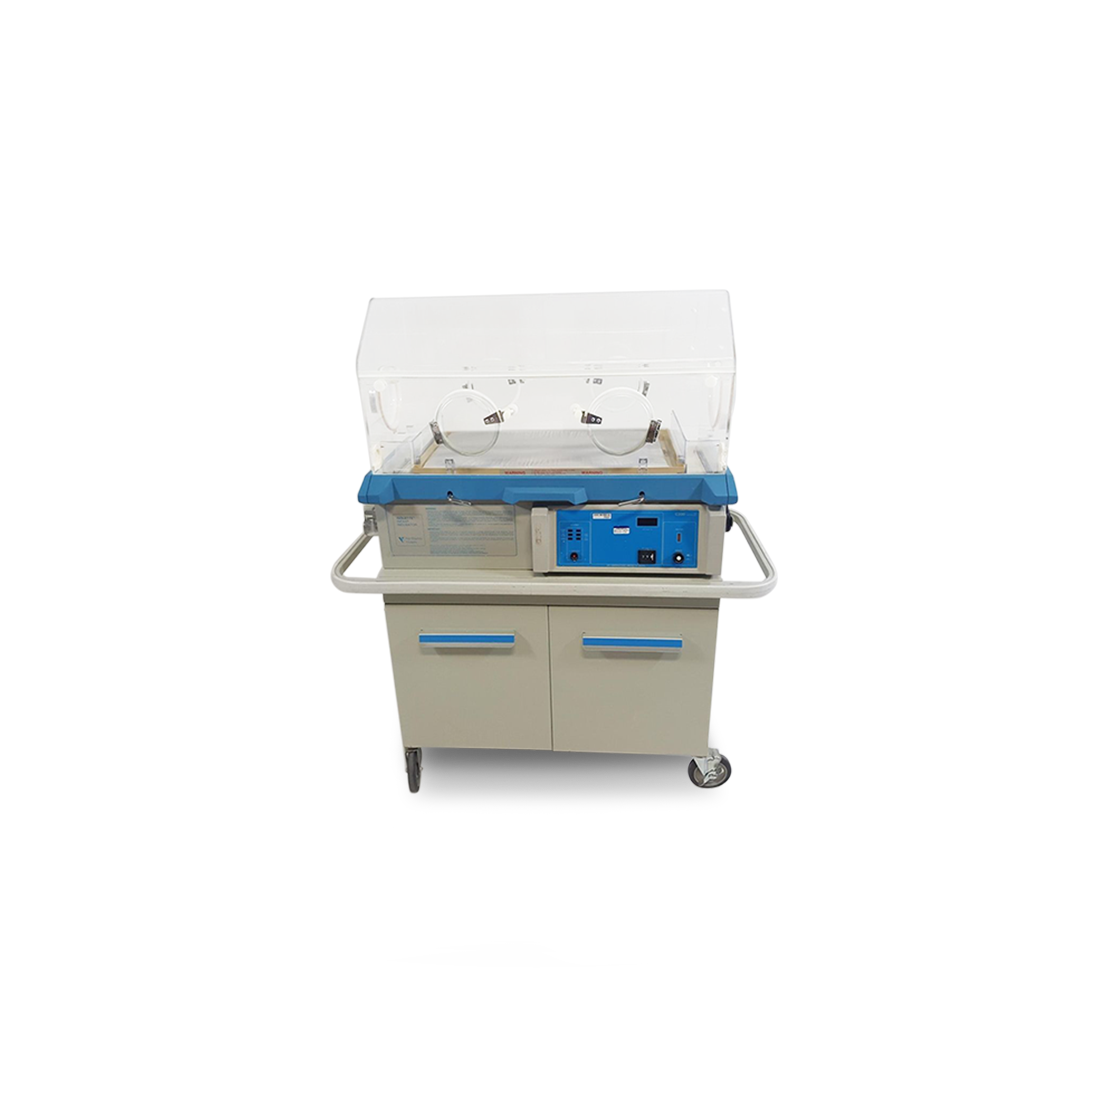 Drager Air Shields C100 Incubator